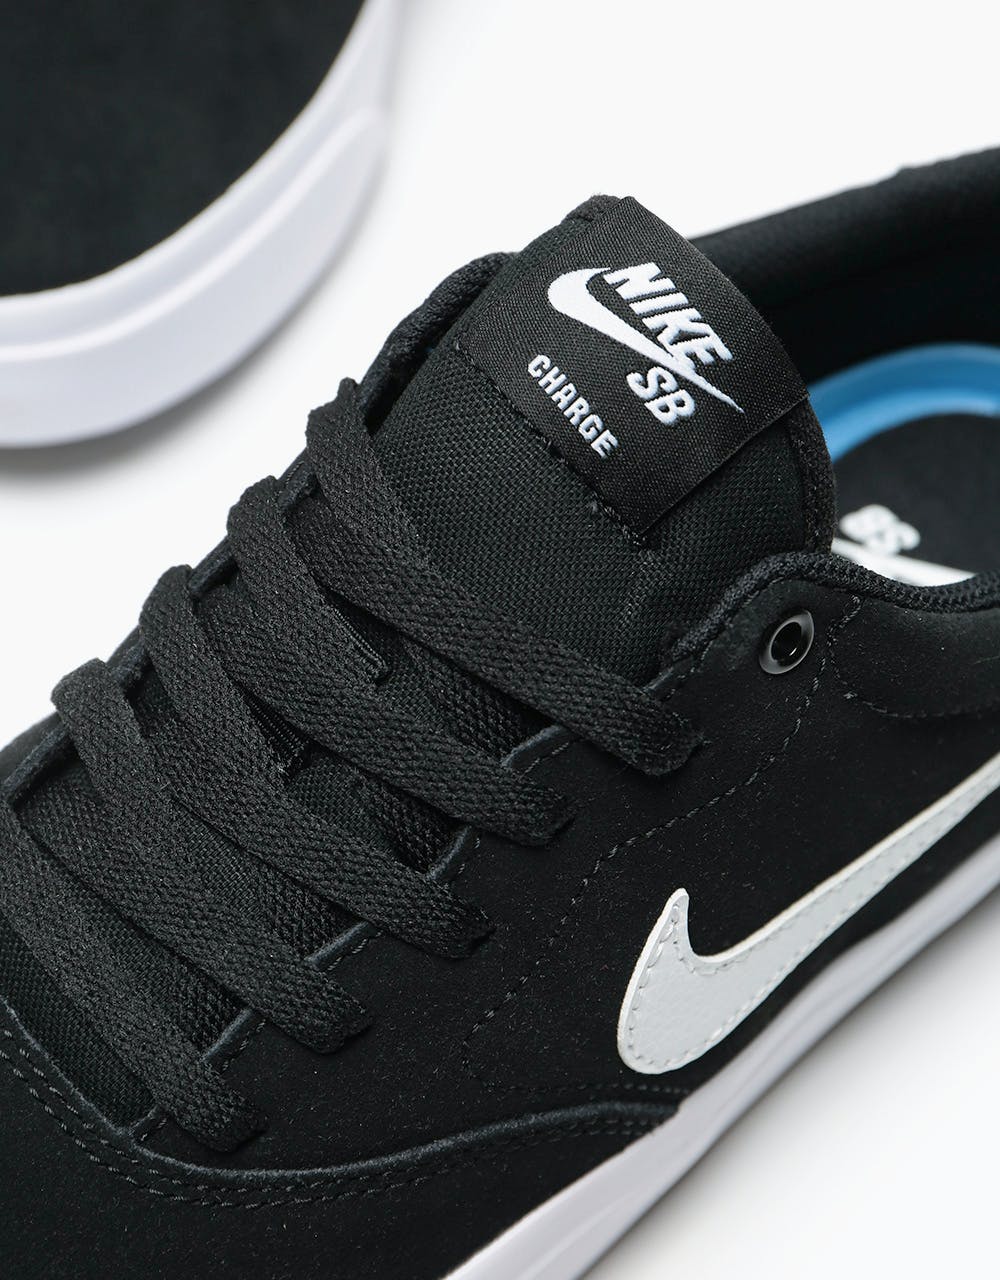 Nike SB Charge Suede Skate Shoes - Black/White-Black – Route One